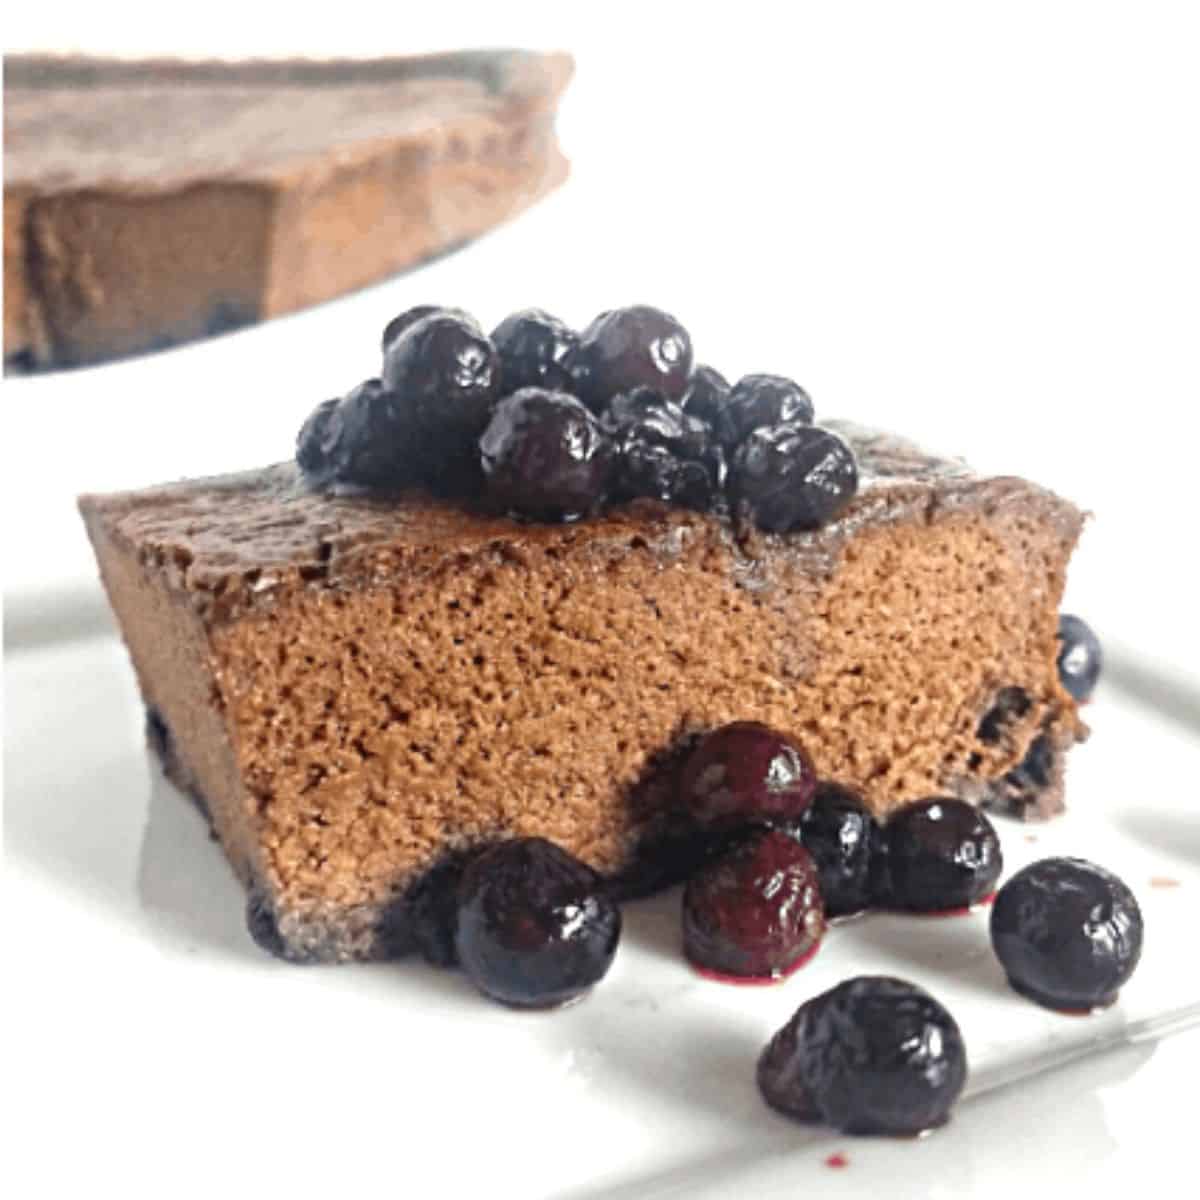 Blueberry Chocolate Cake - 21Keto and Low-Carb Desserts Without Erythritol